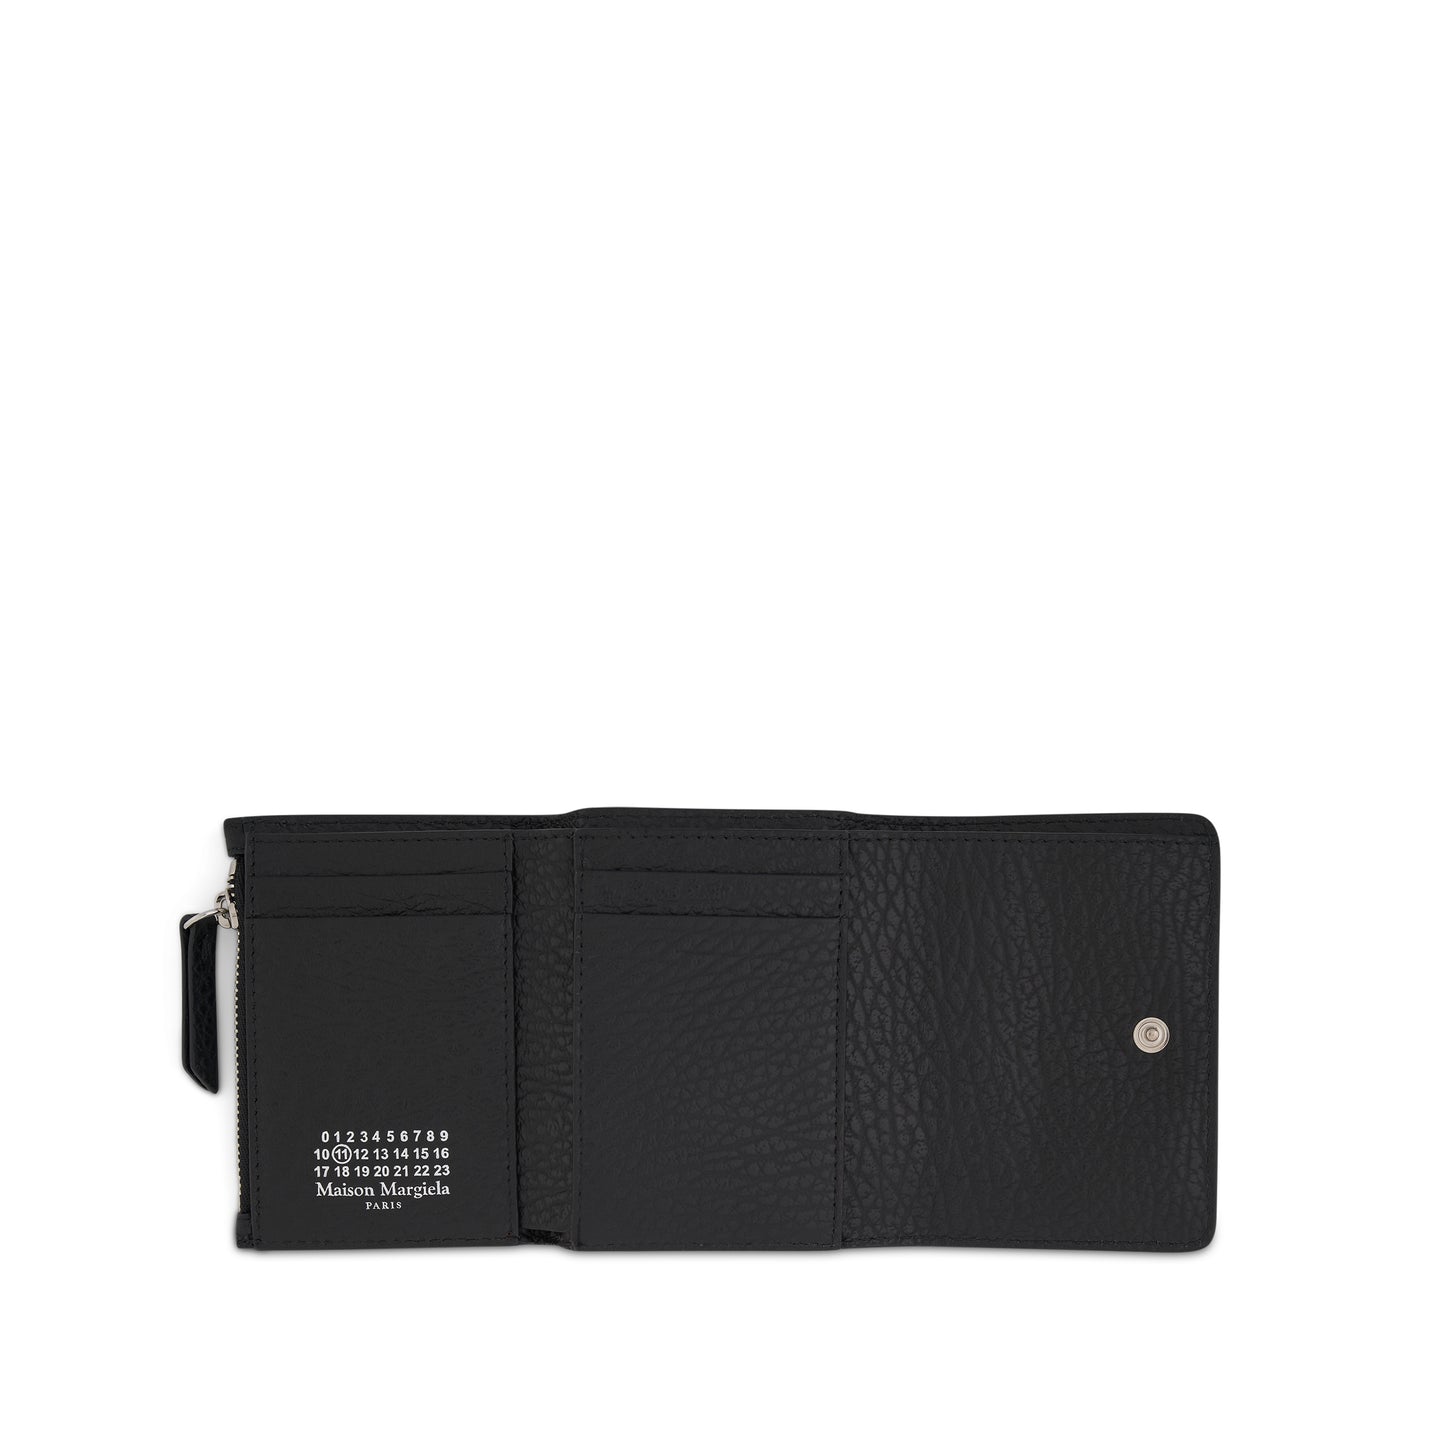 Four Stitches Tri Fold Wallet in Black